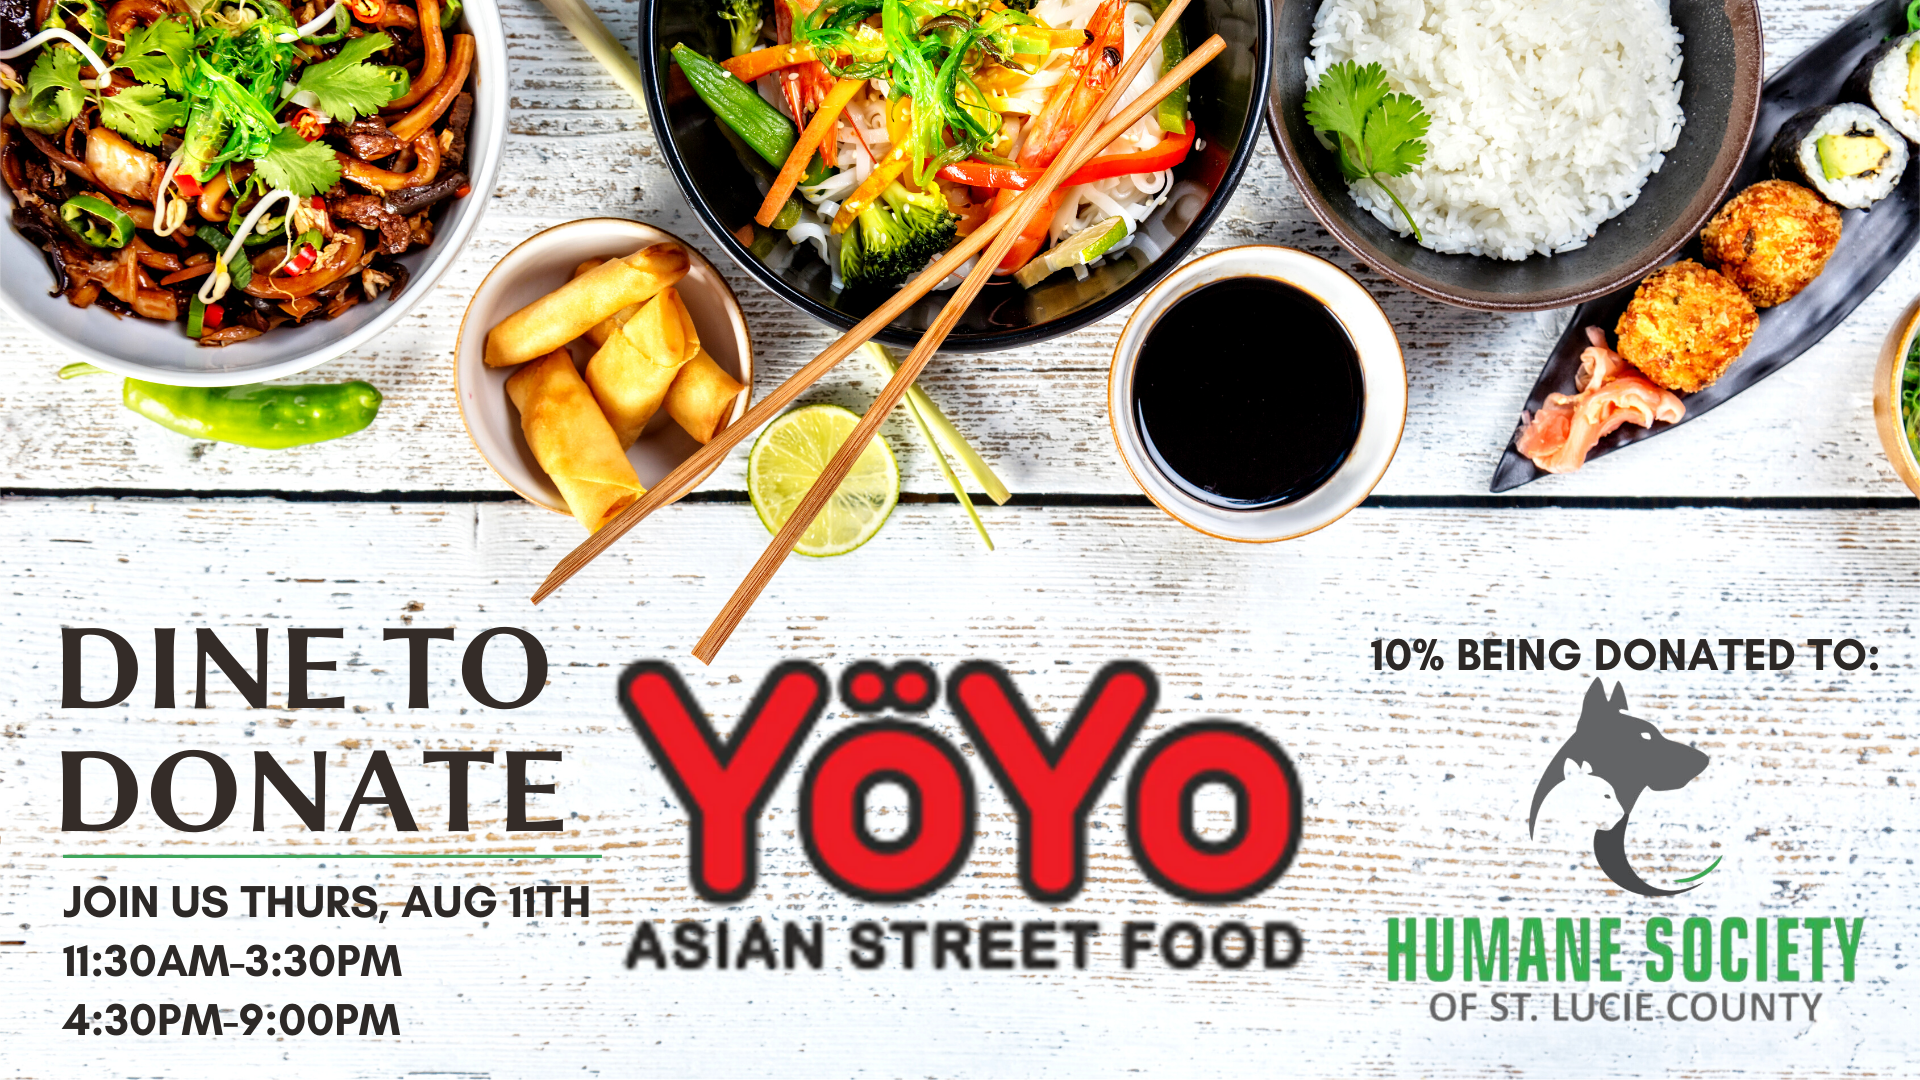 Dine to Donate at YoYo Asian Street Food